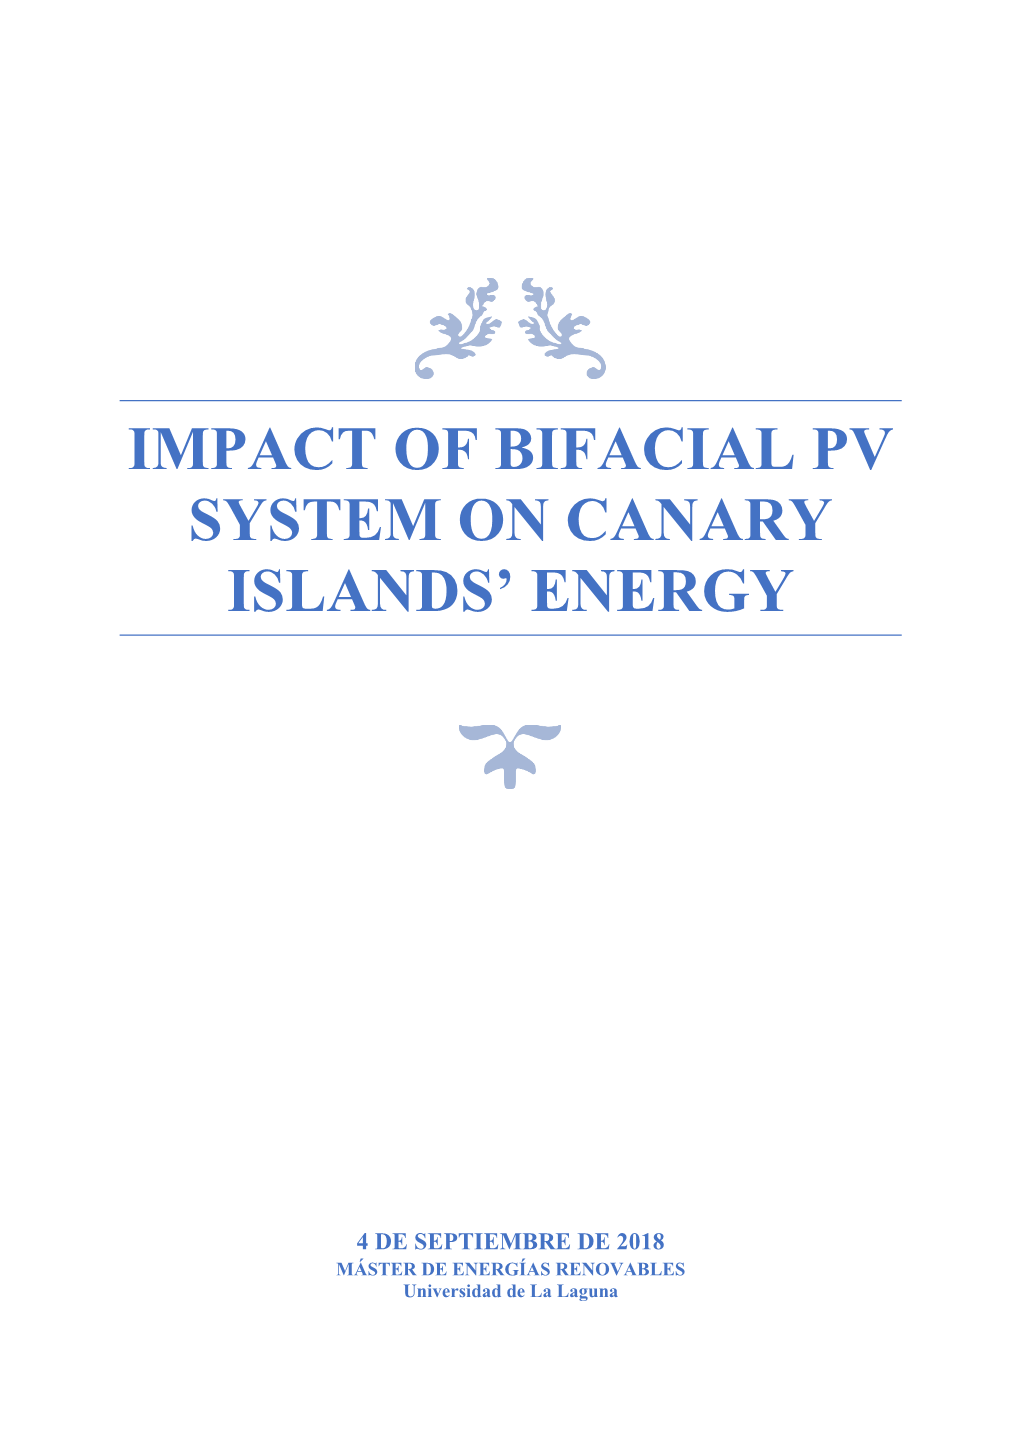 Impact of Bifacial Pv System on Canary Islands' Energy